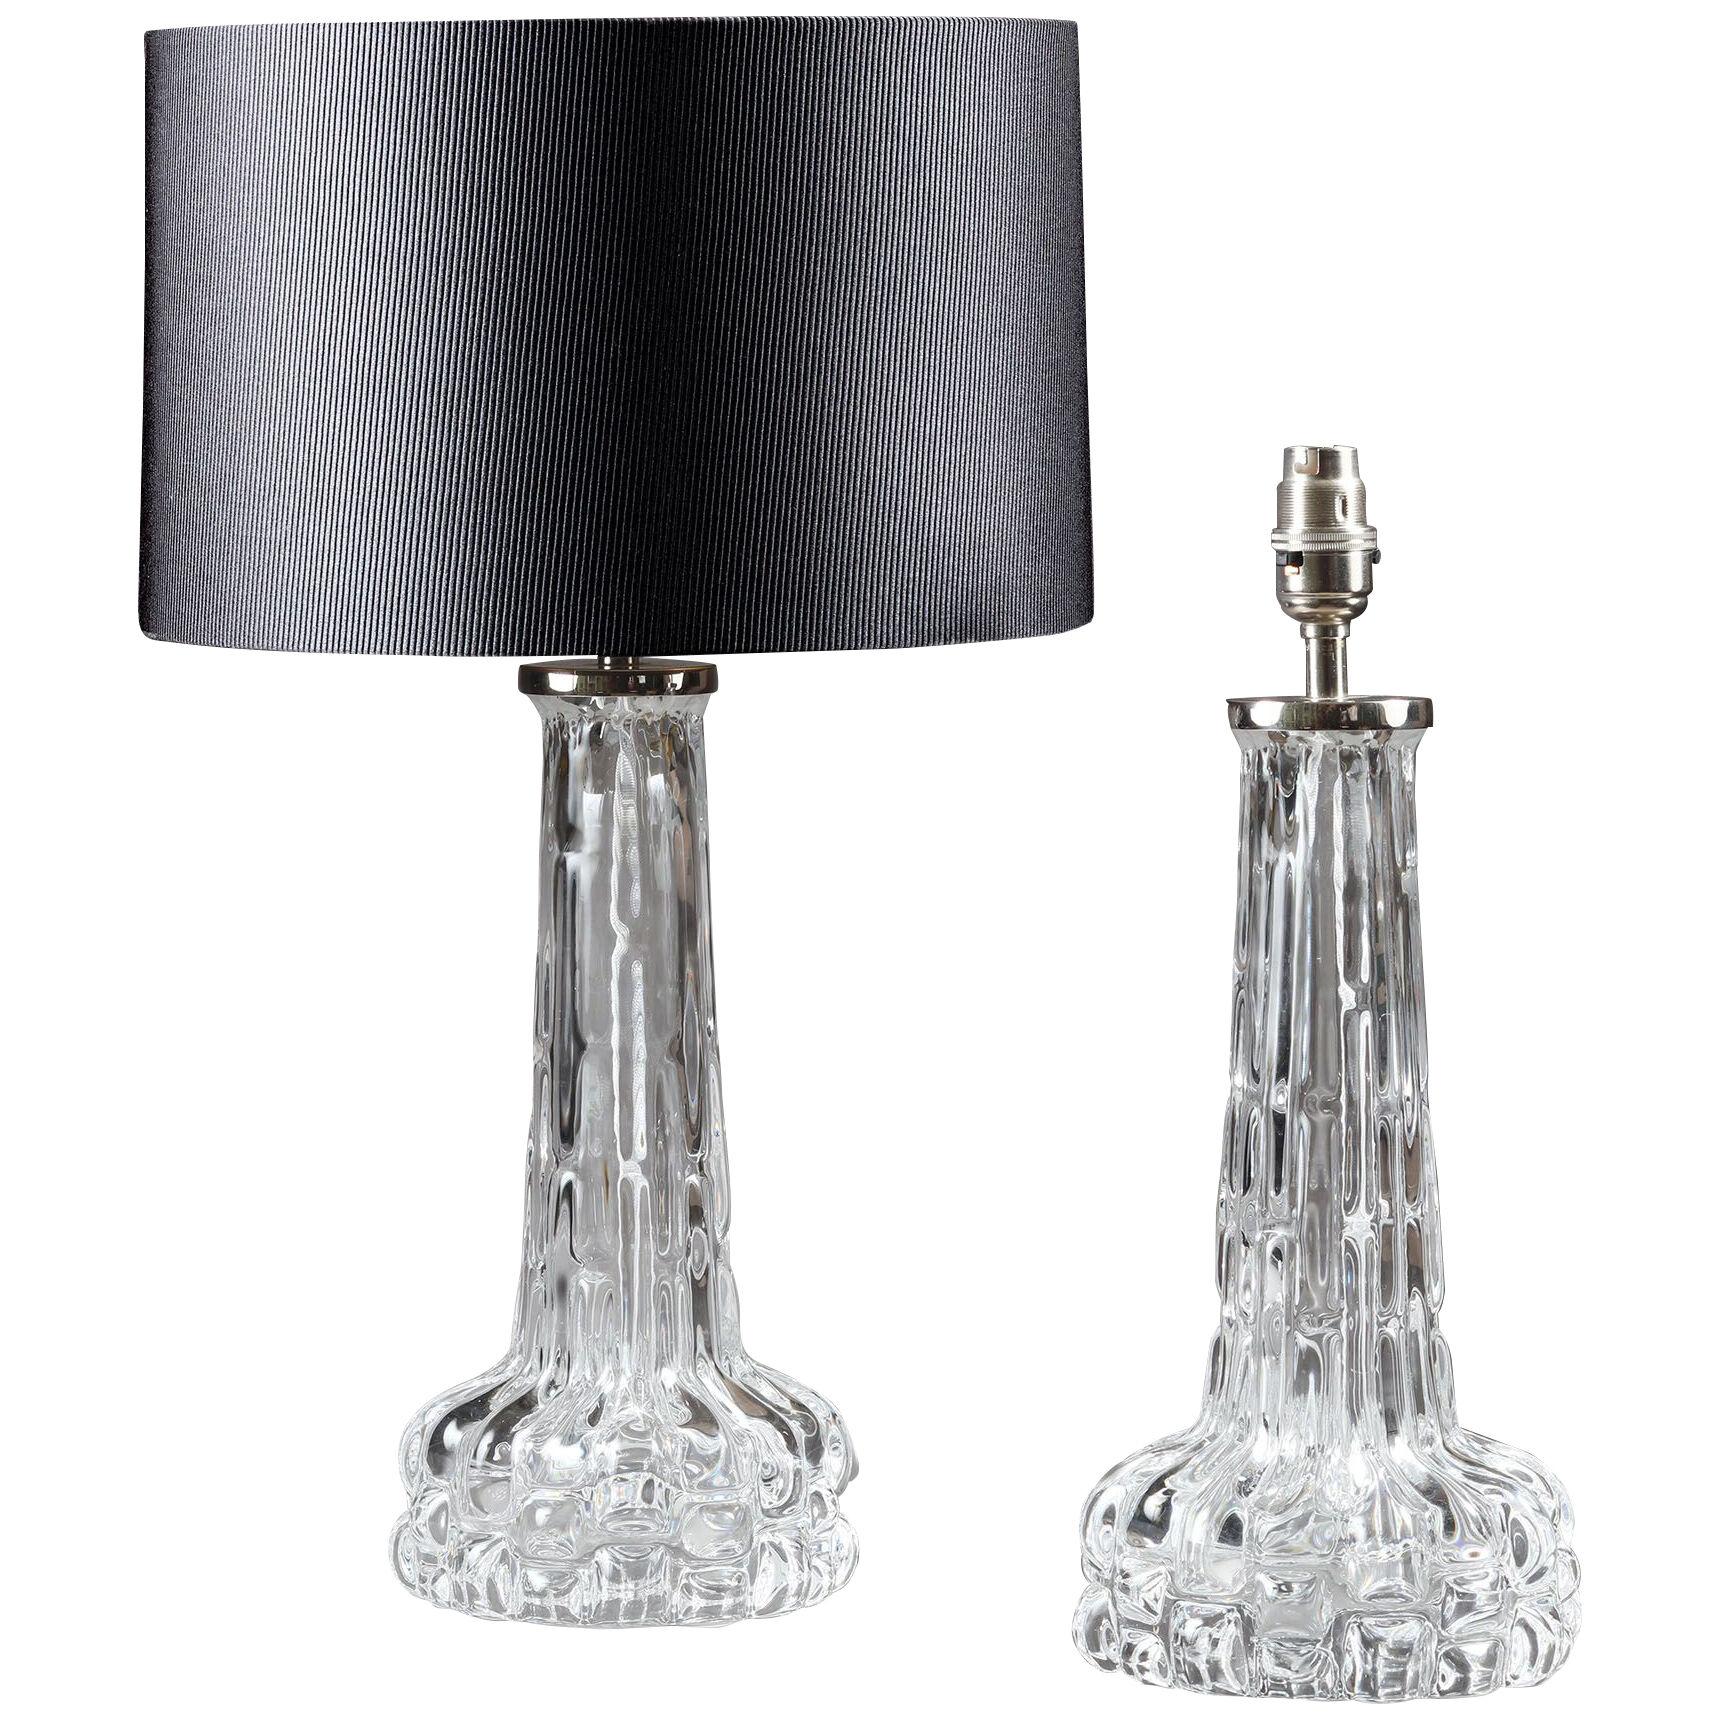 A pair of glass lamps by Orrefors